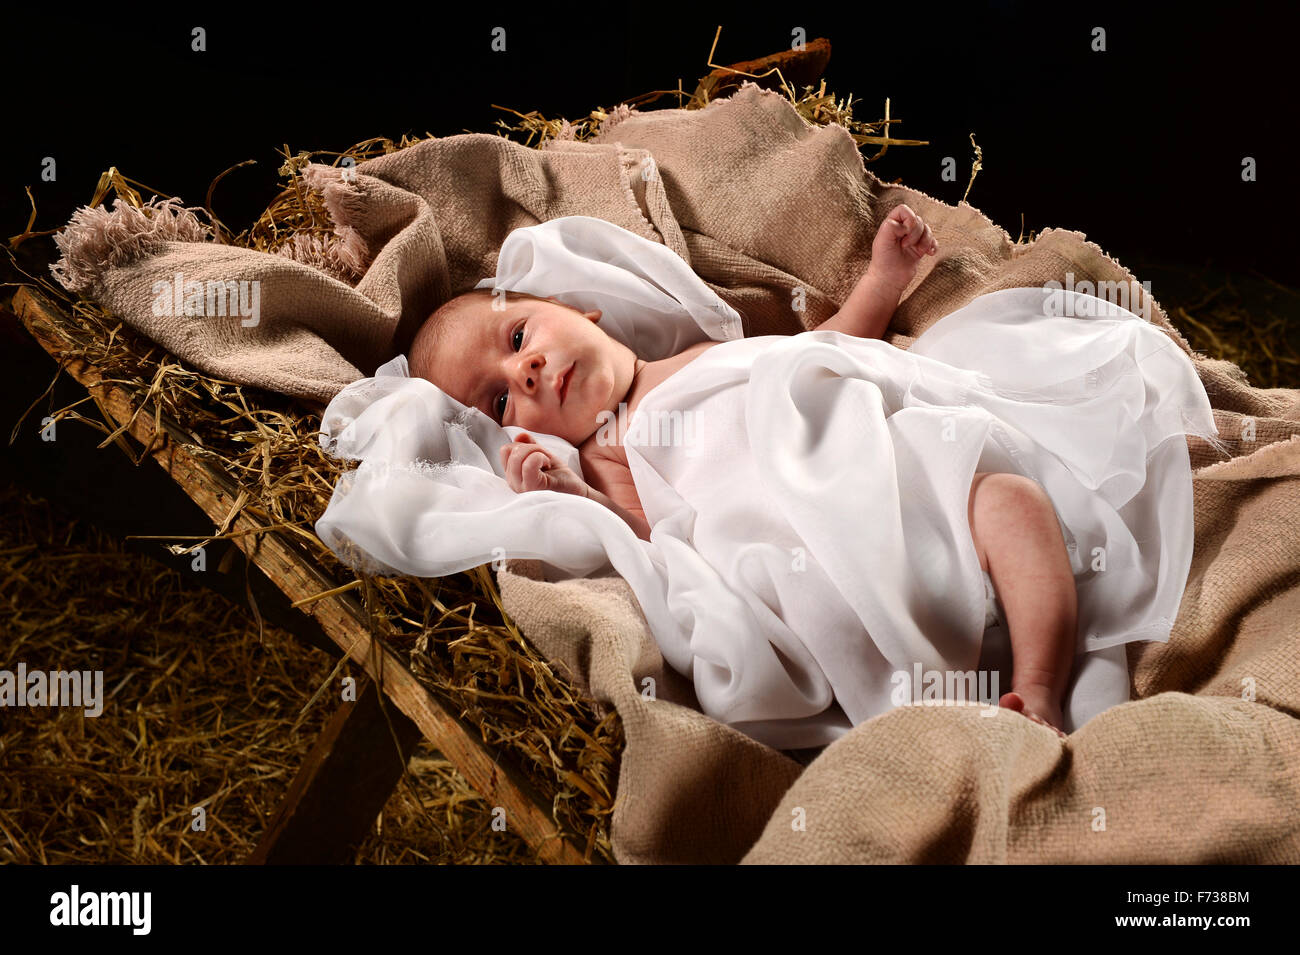 Baby Jesus when born on a manger wrapped in swaddling clothes over dark background Stock Photo